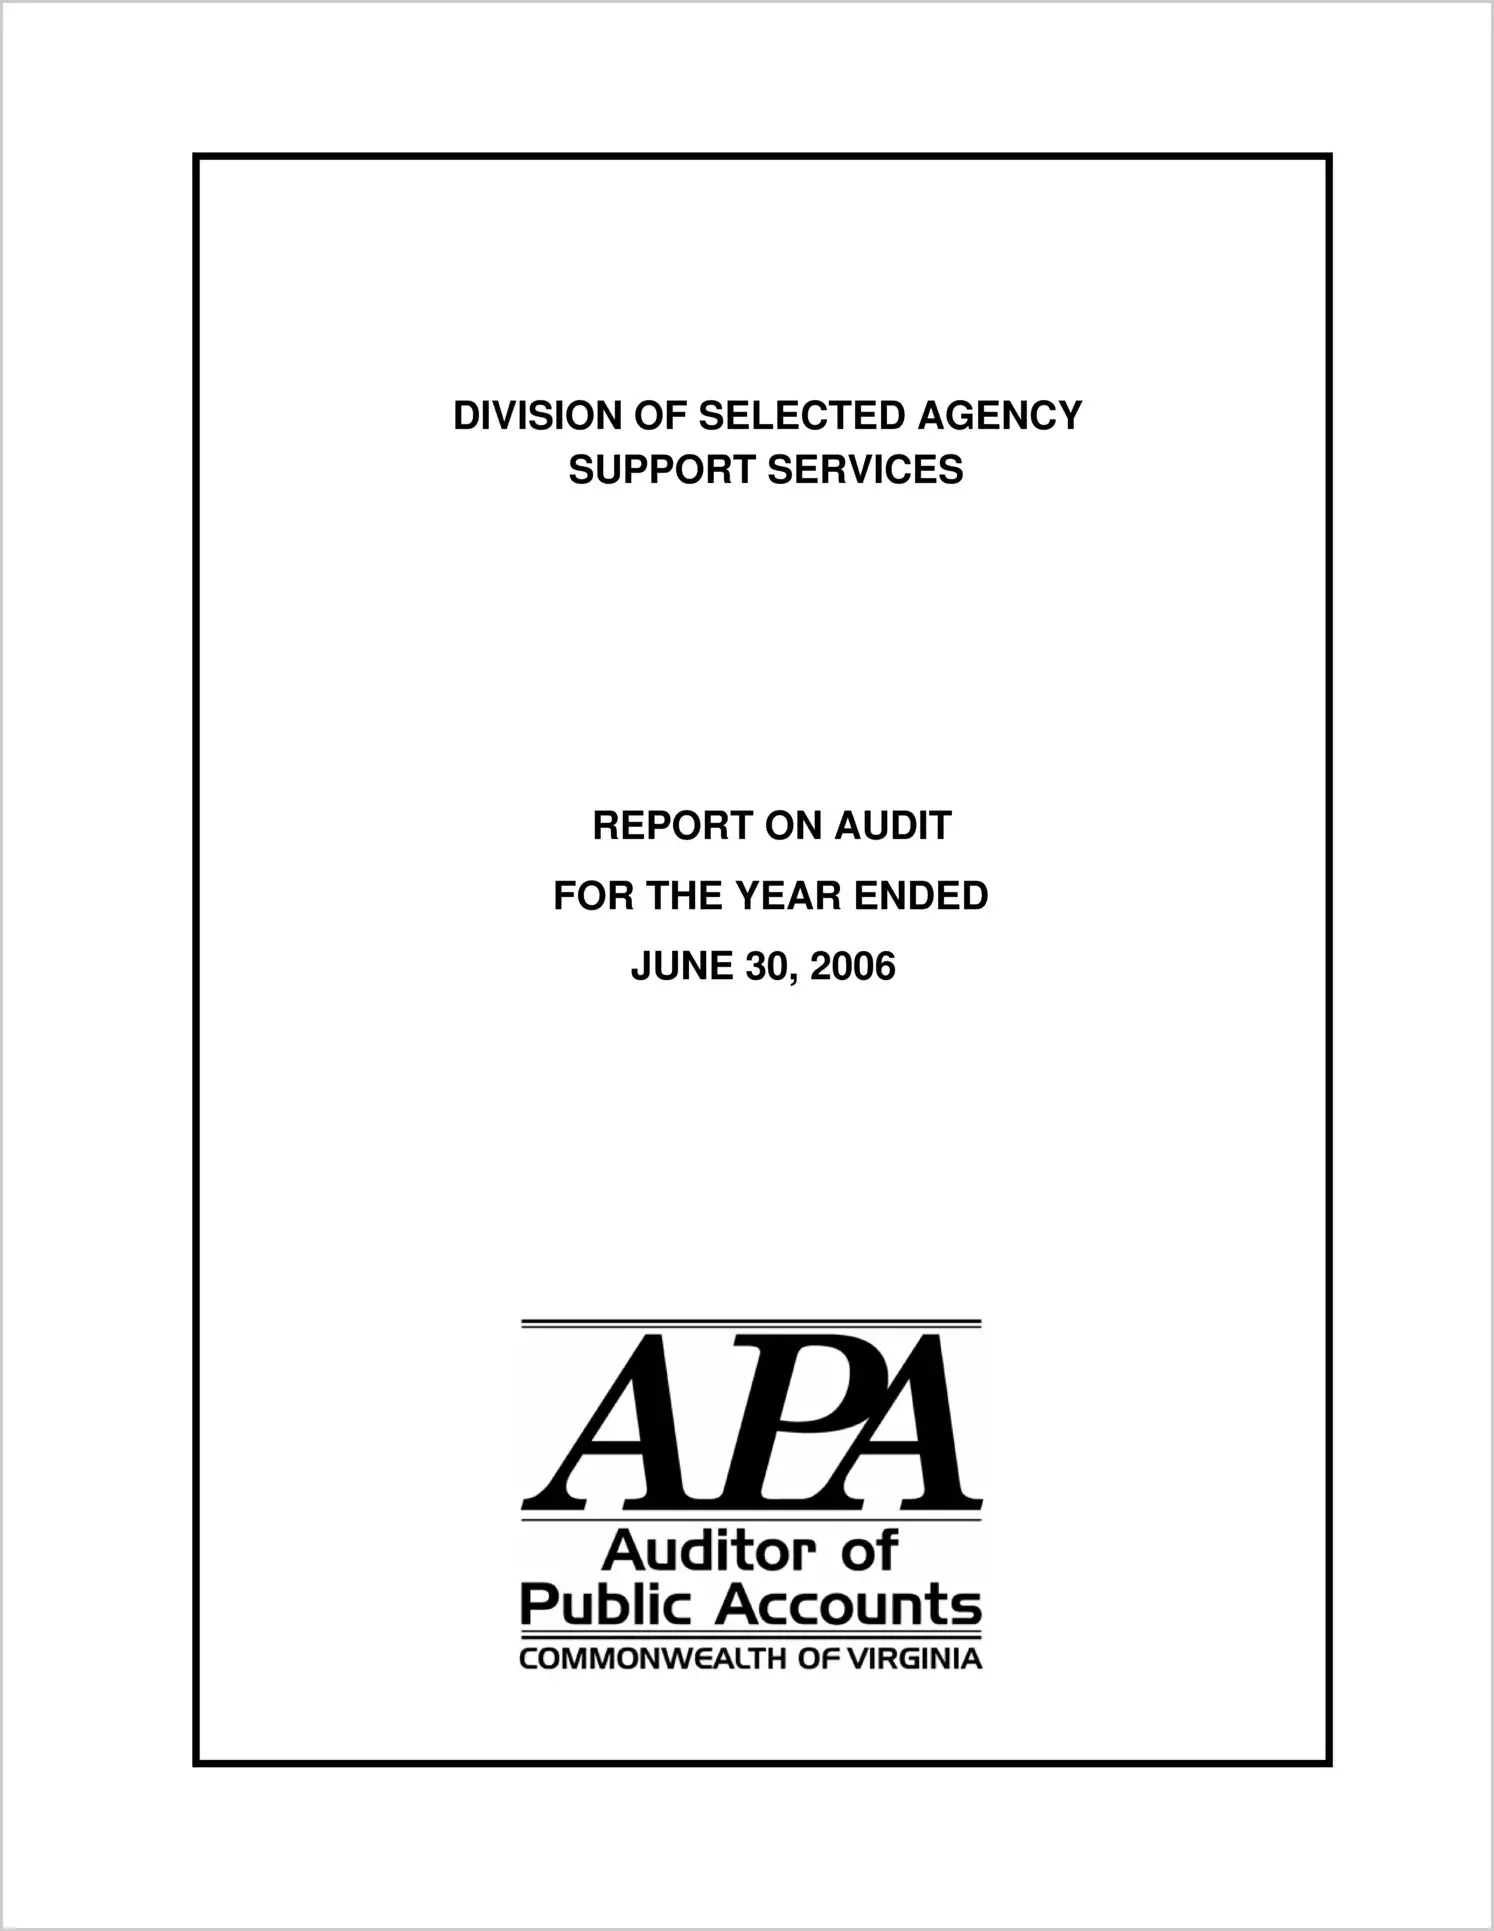 Division of Selected Agency Support Services for the year ended June 30, 2006